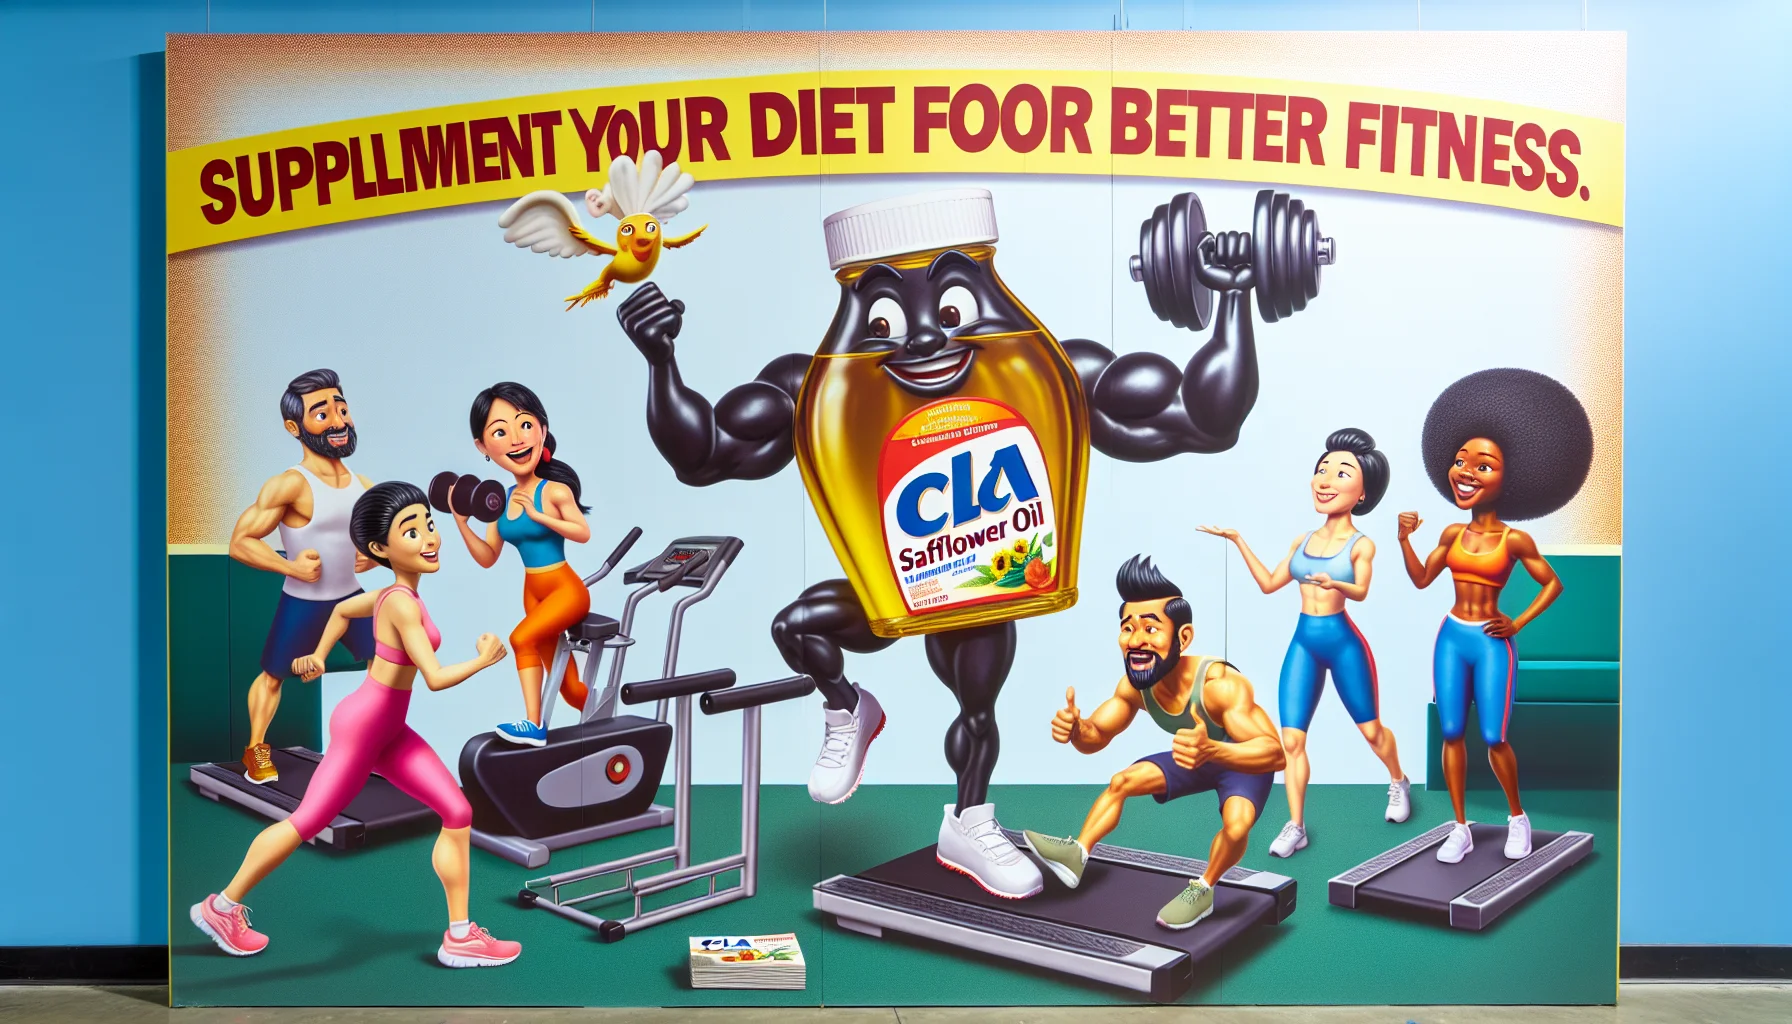 Create a humorous display where CLA Safflower Oil is helping people to enhance their fitness routines. Perhaps the oil could be depicted as a charismatic trainer, animated and enthusiastic, engaging in a lively gym scene. Around it, different people of varying descents and genders - a Hispanic woman lifting weights, a Black man on a treadmill, an Asian woman doing yoga, a Middle-Eastern man on an exercise bike - all with big smiles on their faces, encouraged by the quirky 'Trainer Safflower Oil'. The background could read 'Supplement Your Diet for Better Fitness' in bold, appealing letters.